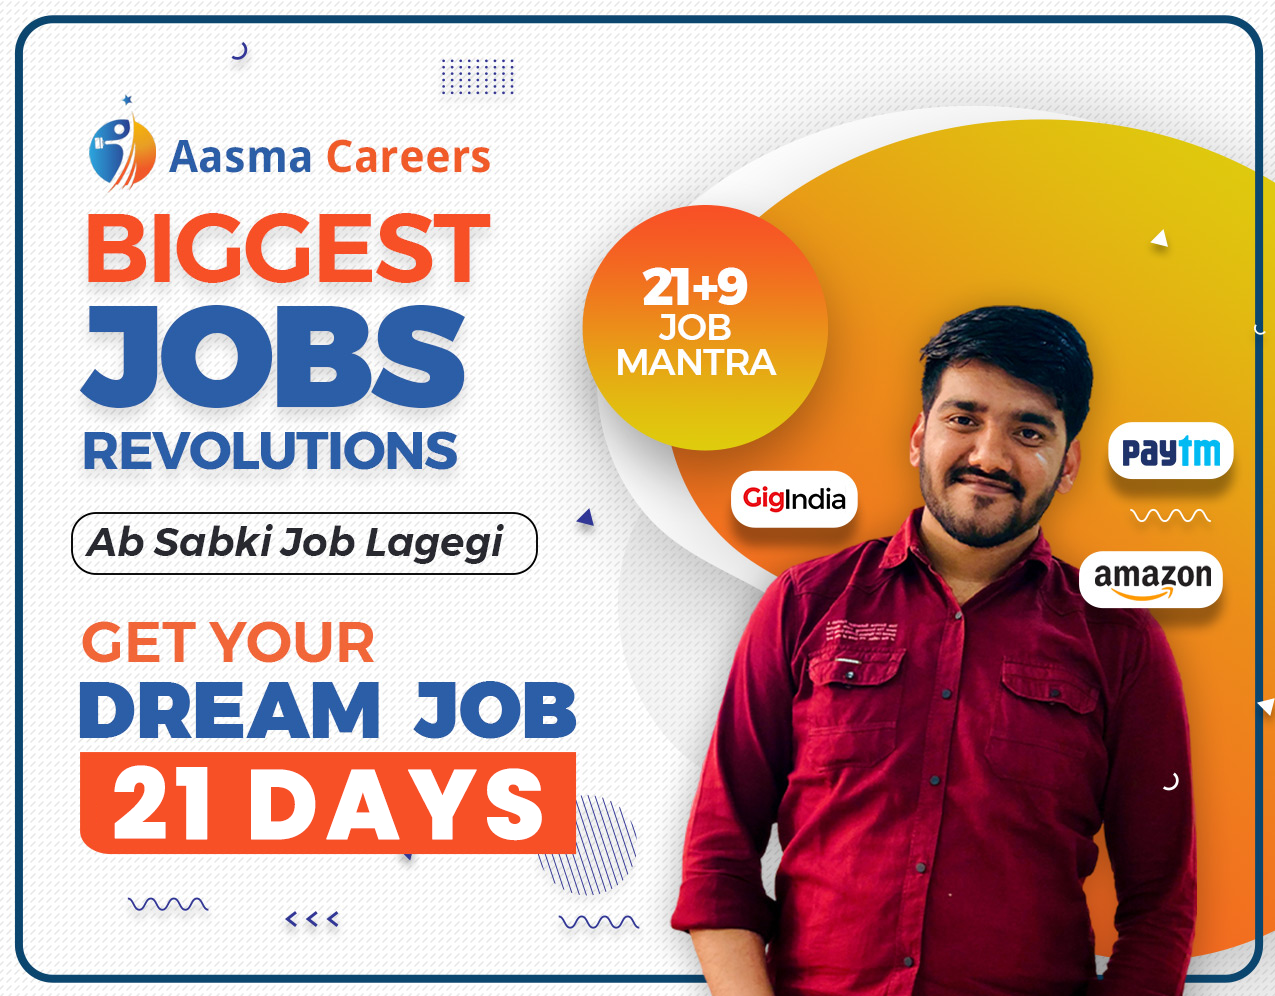 Get Your Dream Job in 21 Days From Mobile - Batch 14